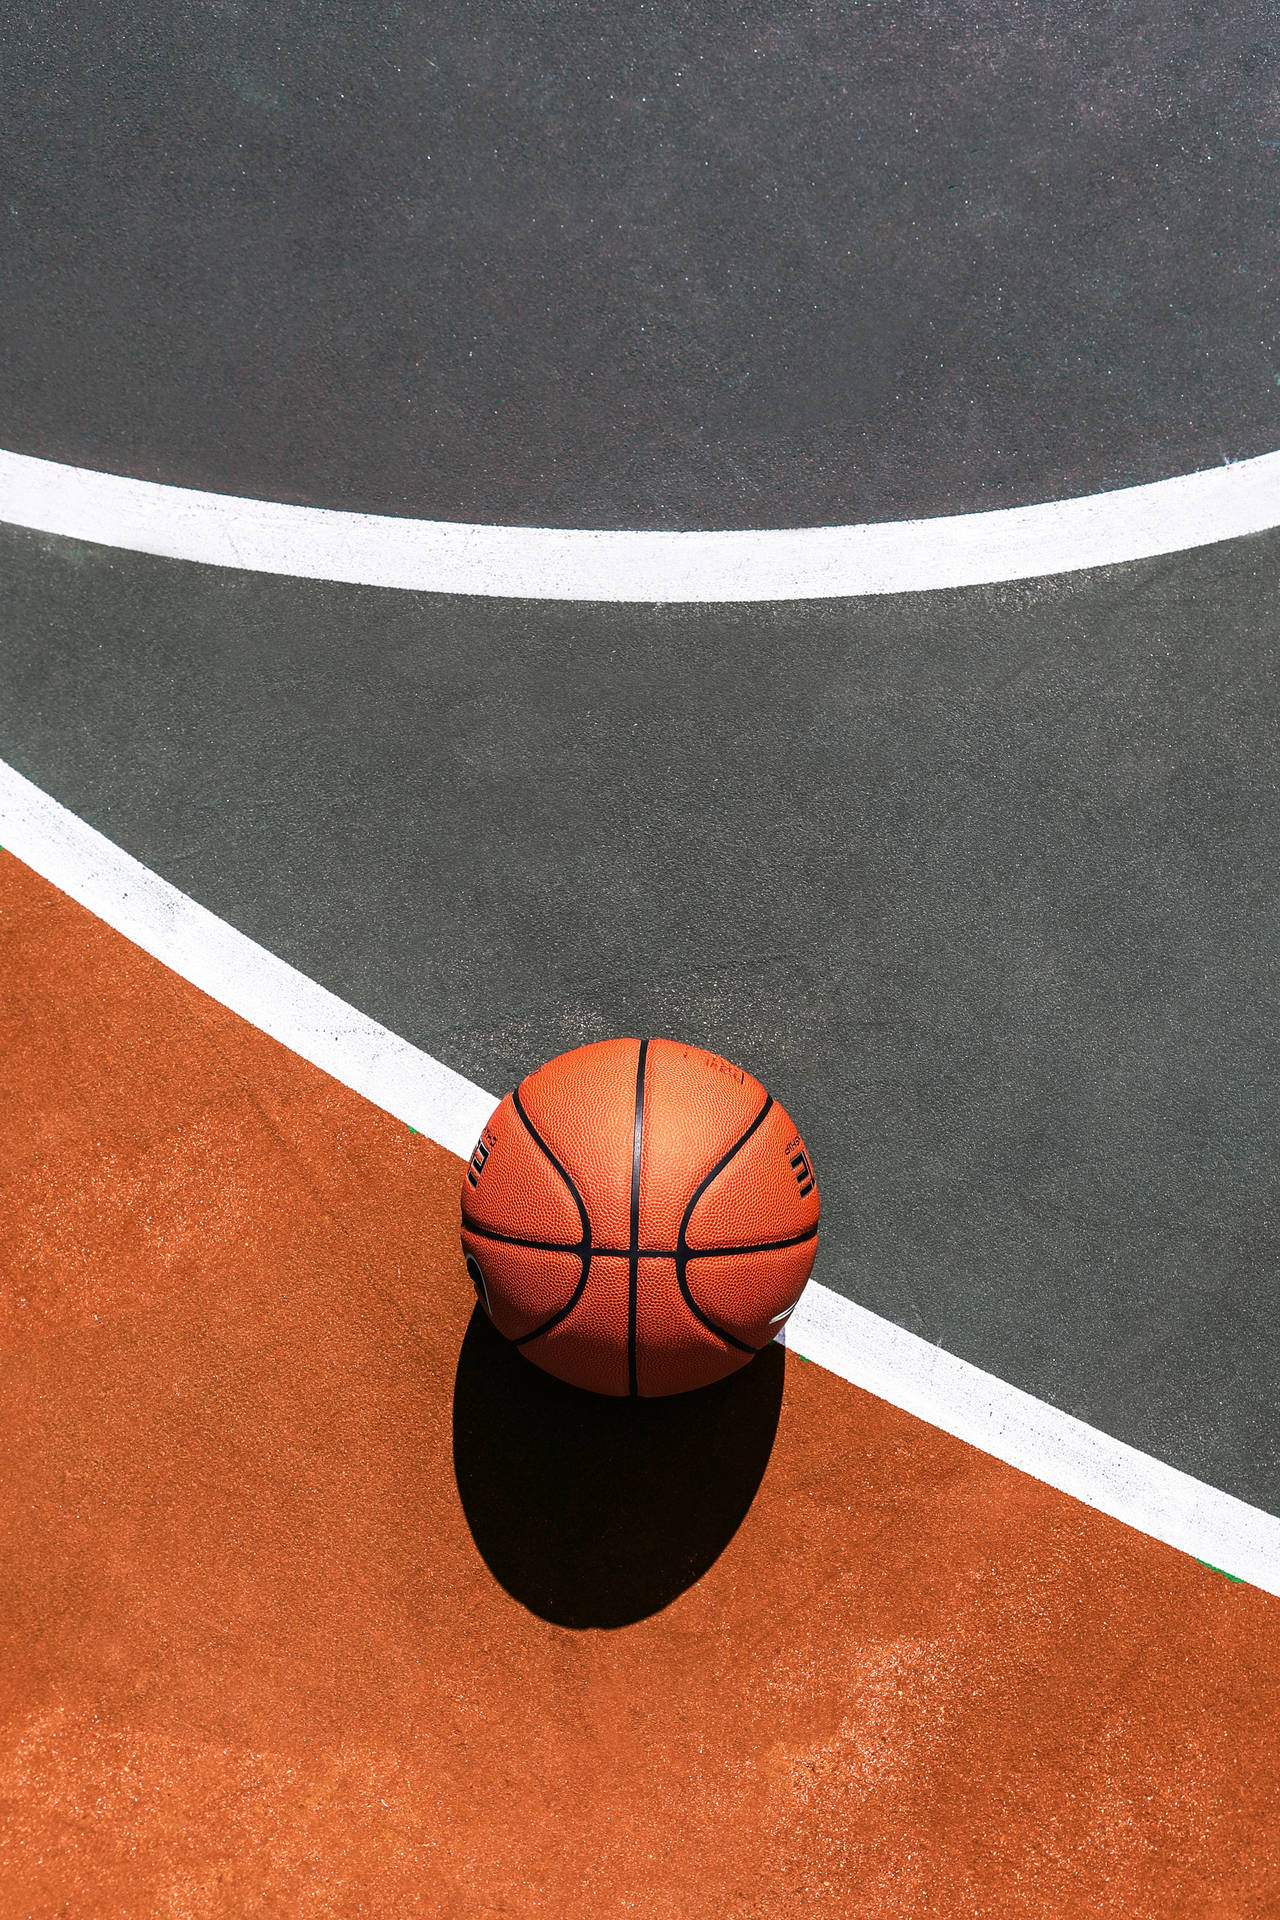 3130X4695 Basketball Wallpaper and Background